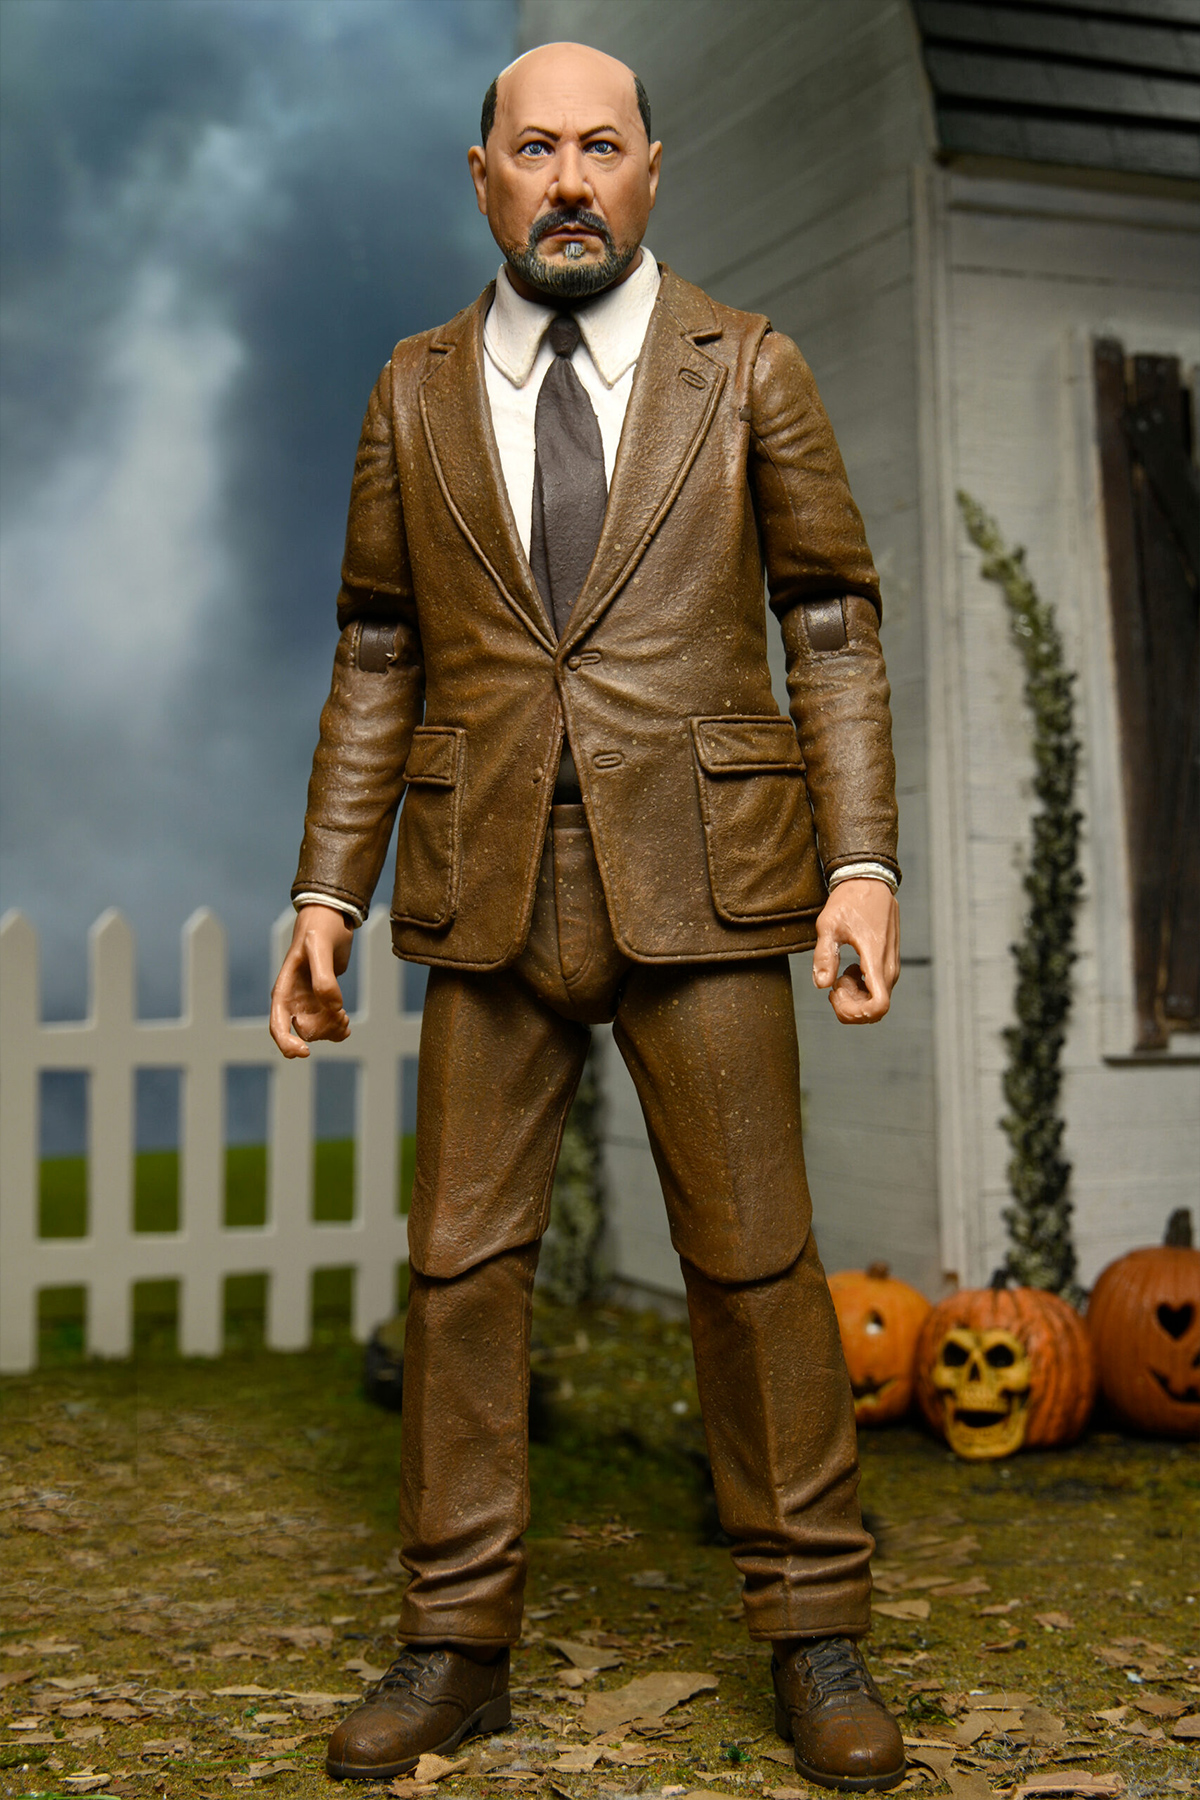 Halloween 2 Ultimate Michael Myers and Dr. Loomis 7-Inch Scale Action Figure 2-Pack class=